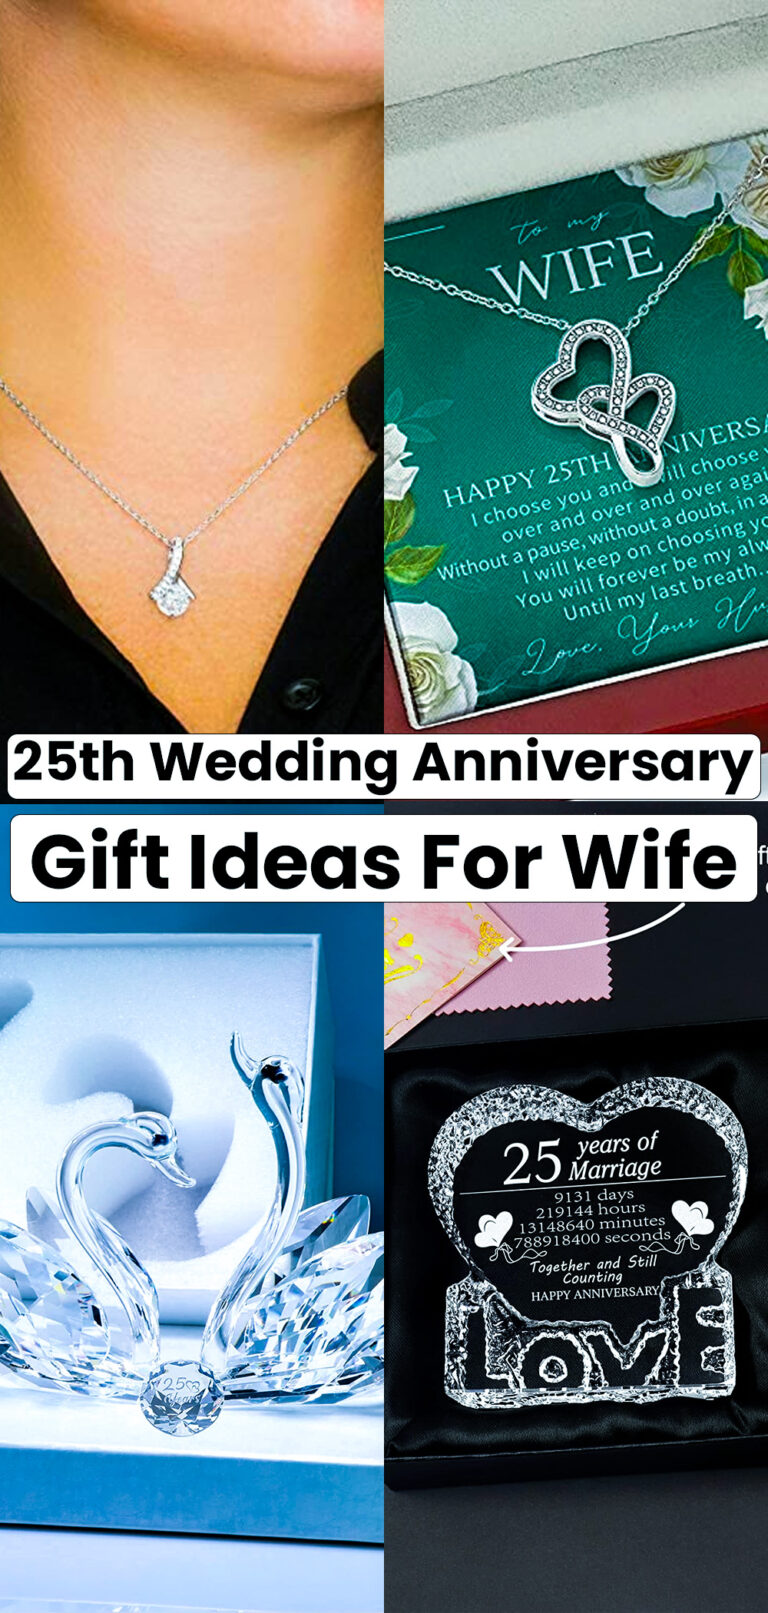 25th Wedding Anniversary Gift Ideas for Wife